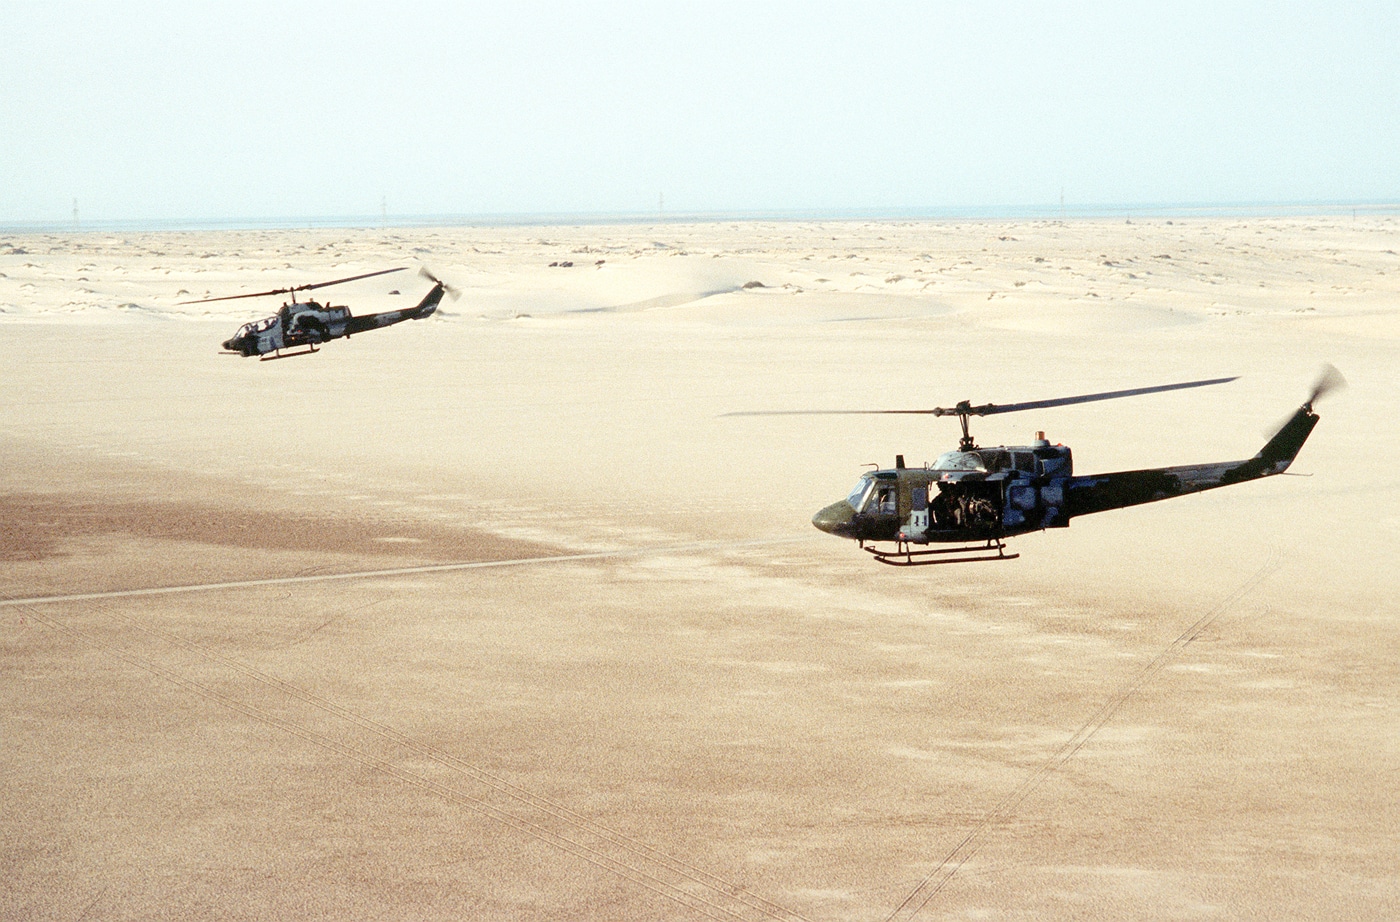 Shown in this photograph is a UH-1N Iroquois helicopter, foreground, and an AH-1 Sea Cobra helicopter fly over the desert in Saudi Arabia during Operation Desert Shield in 1991.